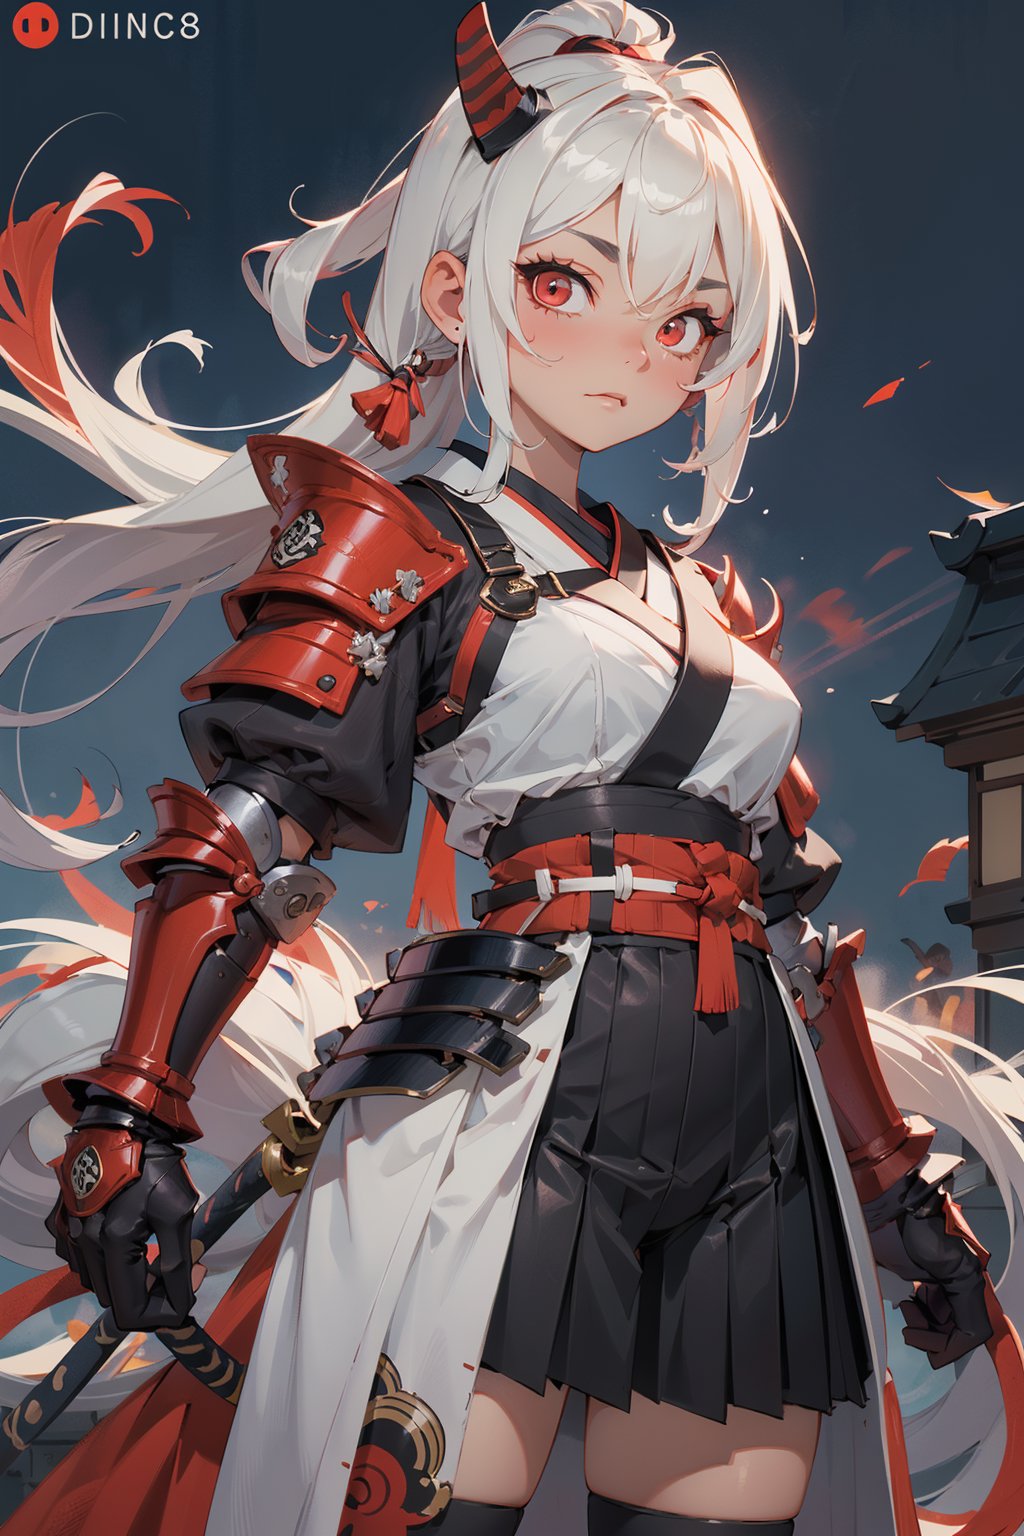 (dinamic pose), (face of a 26 year old girl, body of a 26 year old girl), crimson red eyes, female samurai, armor, skirt, horror style, area lighting